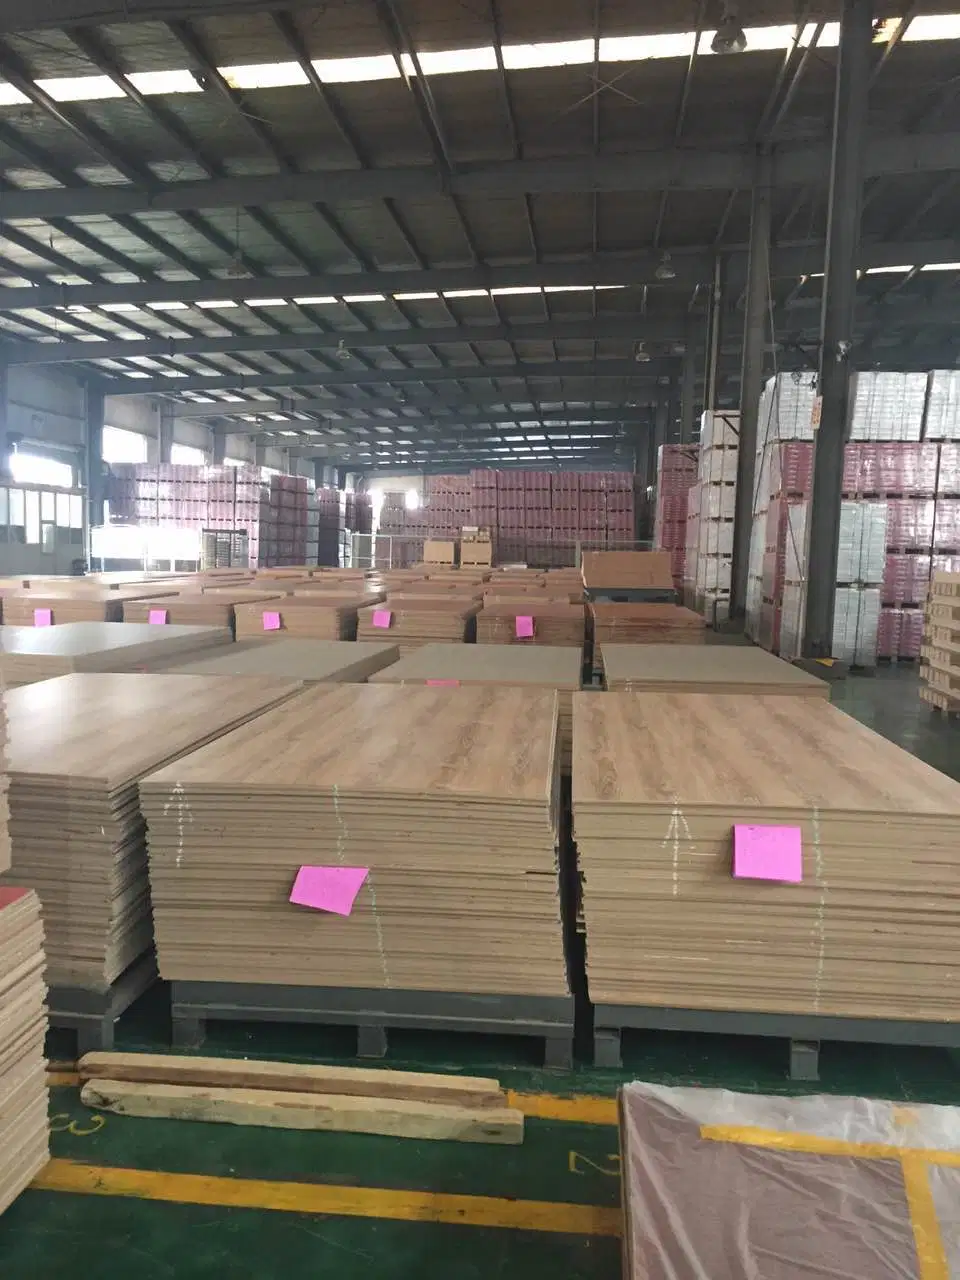 China Factory Manufacturer HDF MDF High Quality AC3 AC4 7mm 8mm 12mm Waterproof Wood Laminate Floor Wooden Laminated Flooring Oak Parquet Plank Floating Tile